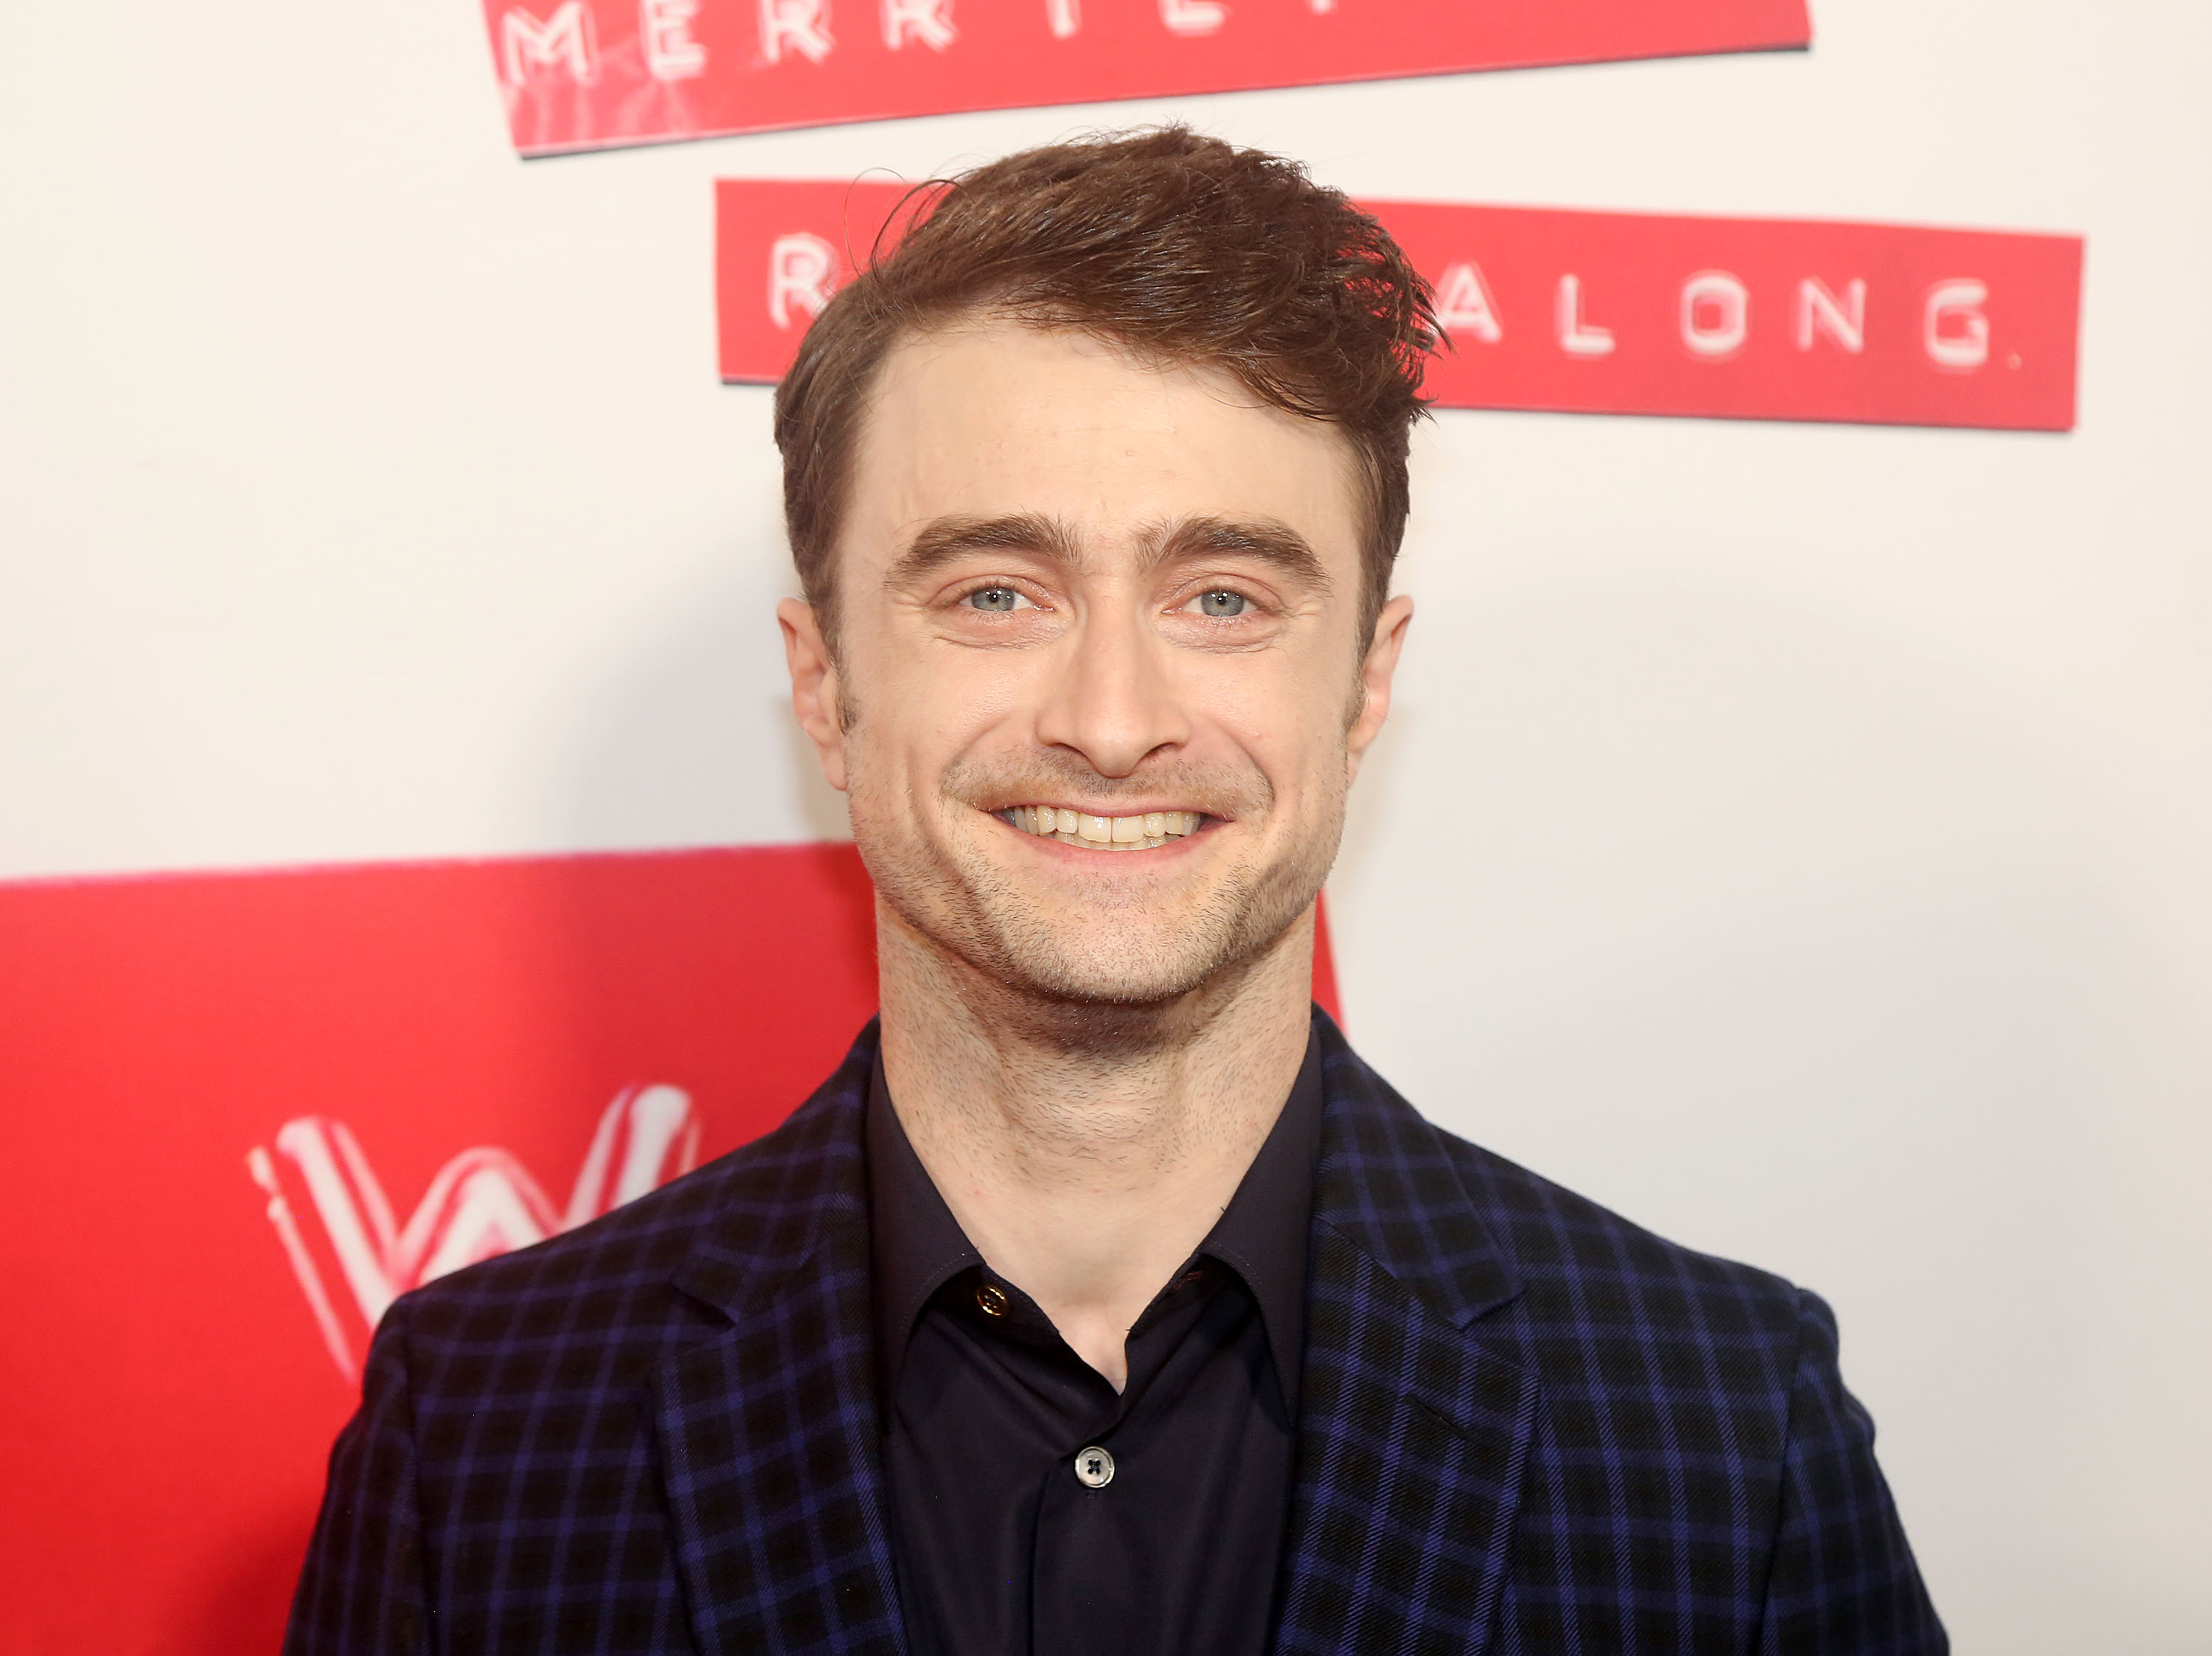 Daniel Radcliffe at the opening night of Stephen Sondheim's "Merrily We Roll Along" on Broadway on October 8, 2023, in New York City. | Source: Getty Images